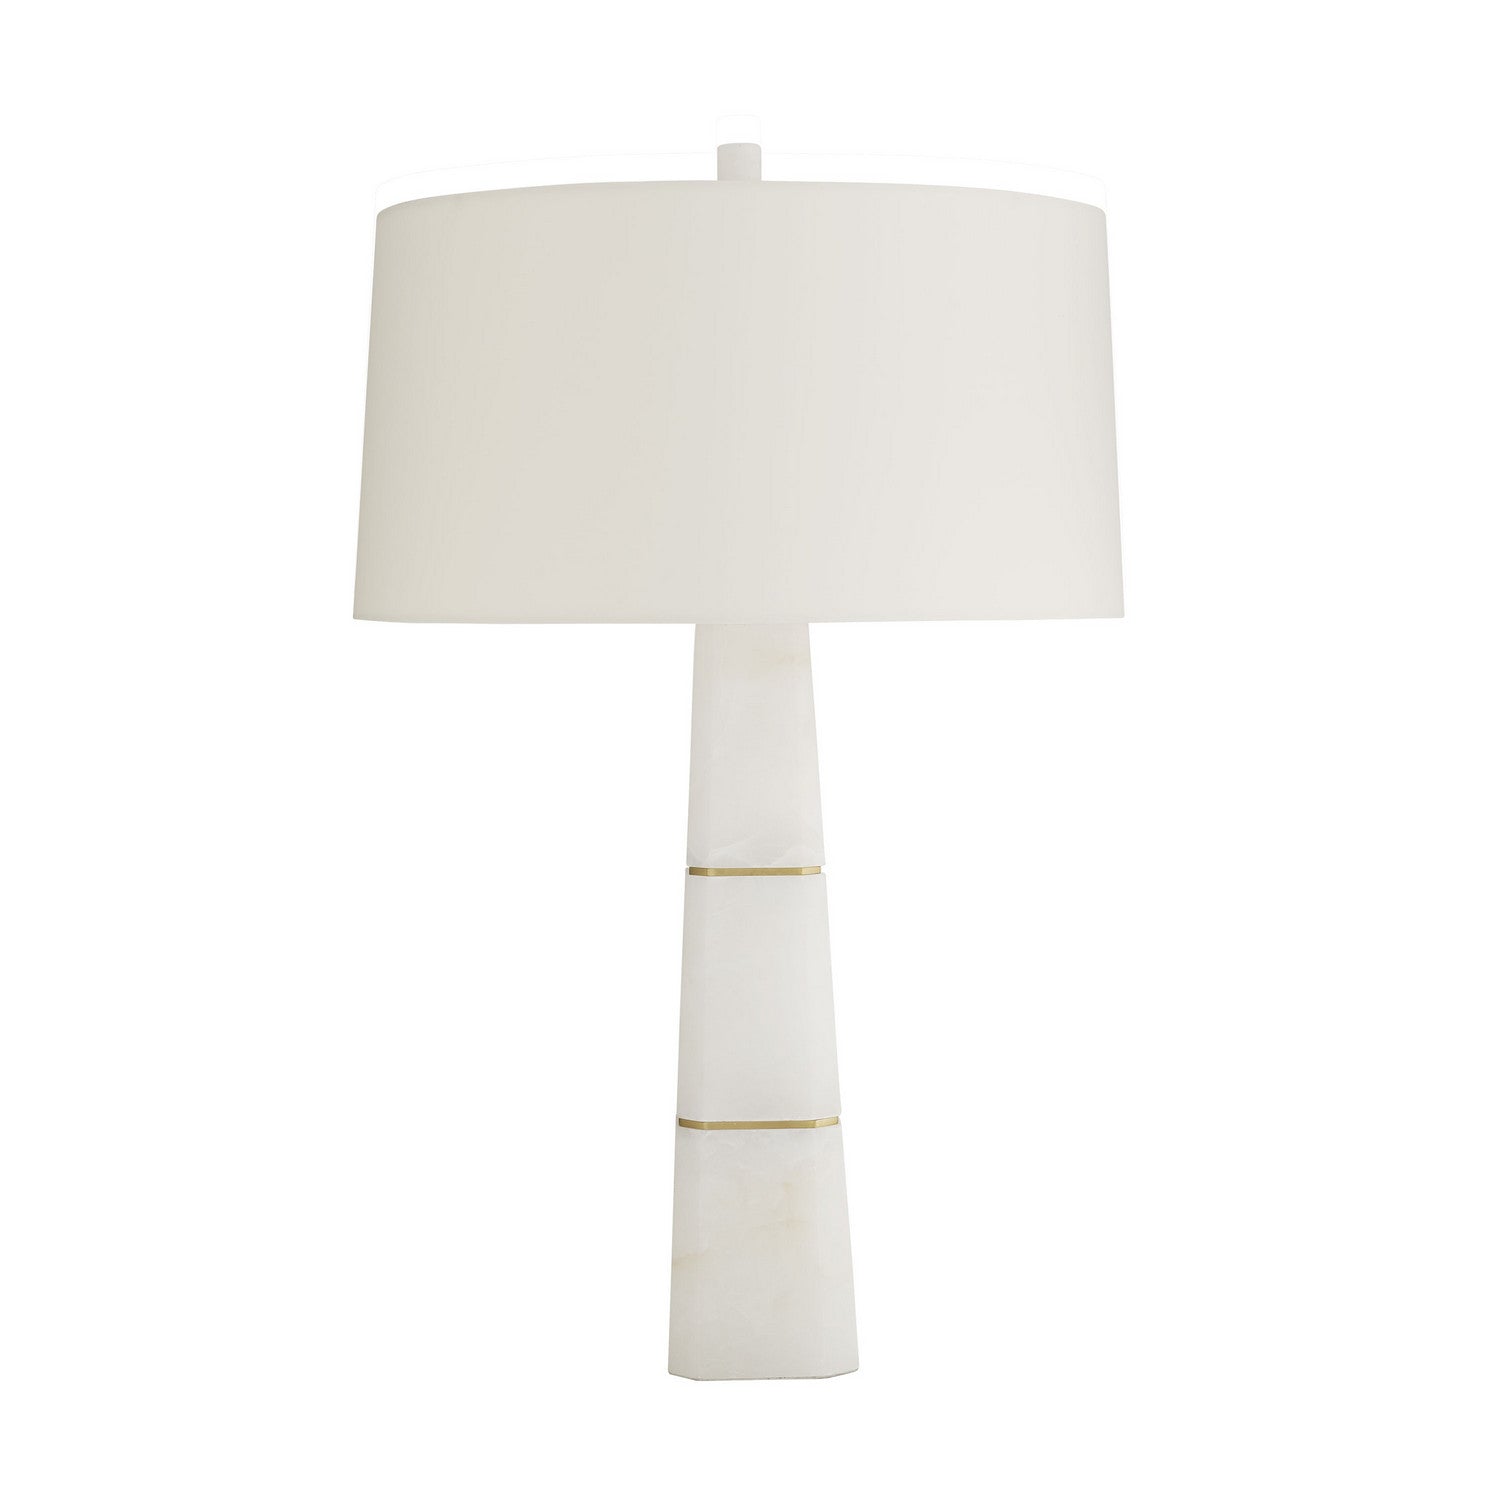 One Light Table Lamp from the Dosman collection in White finish